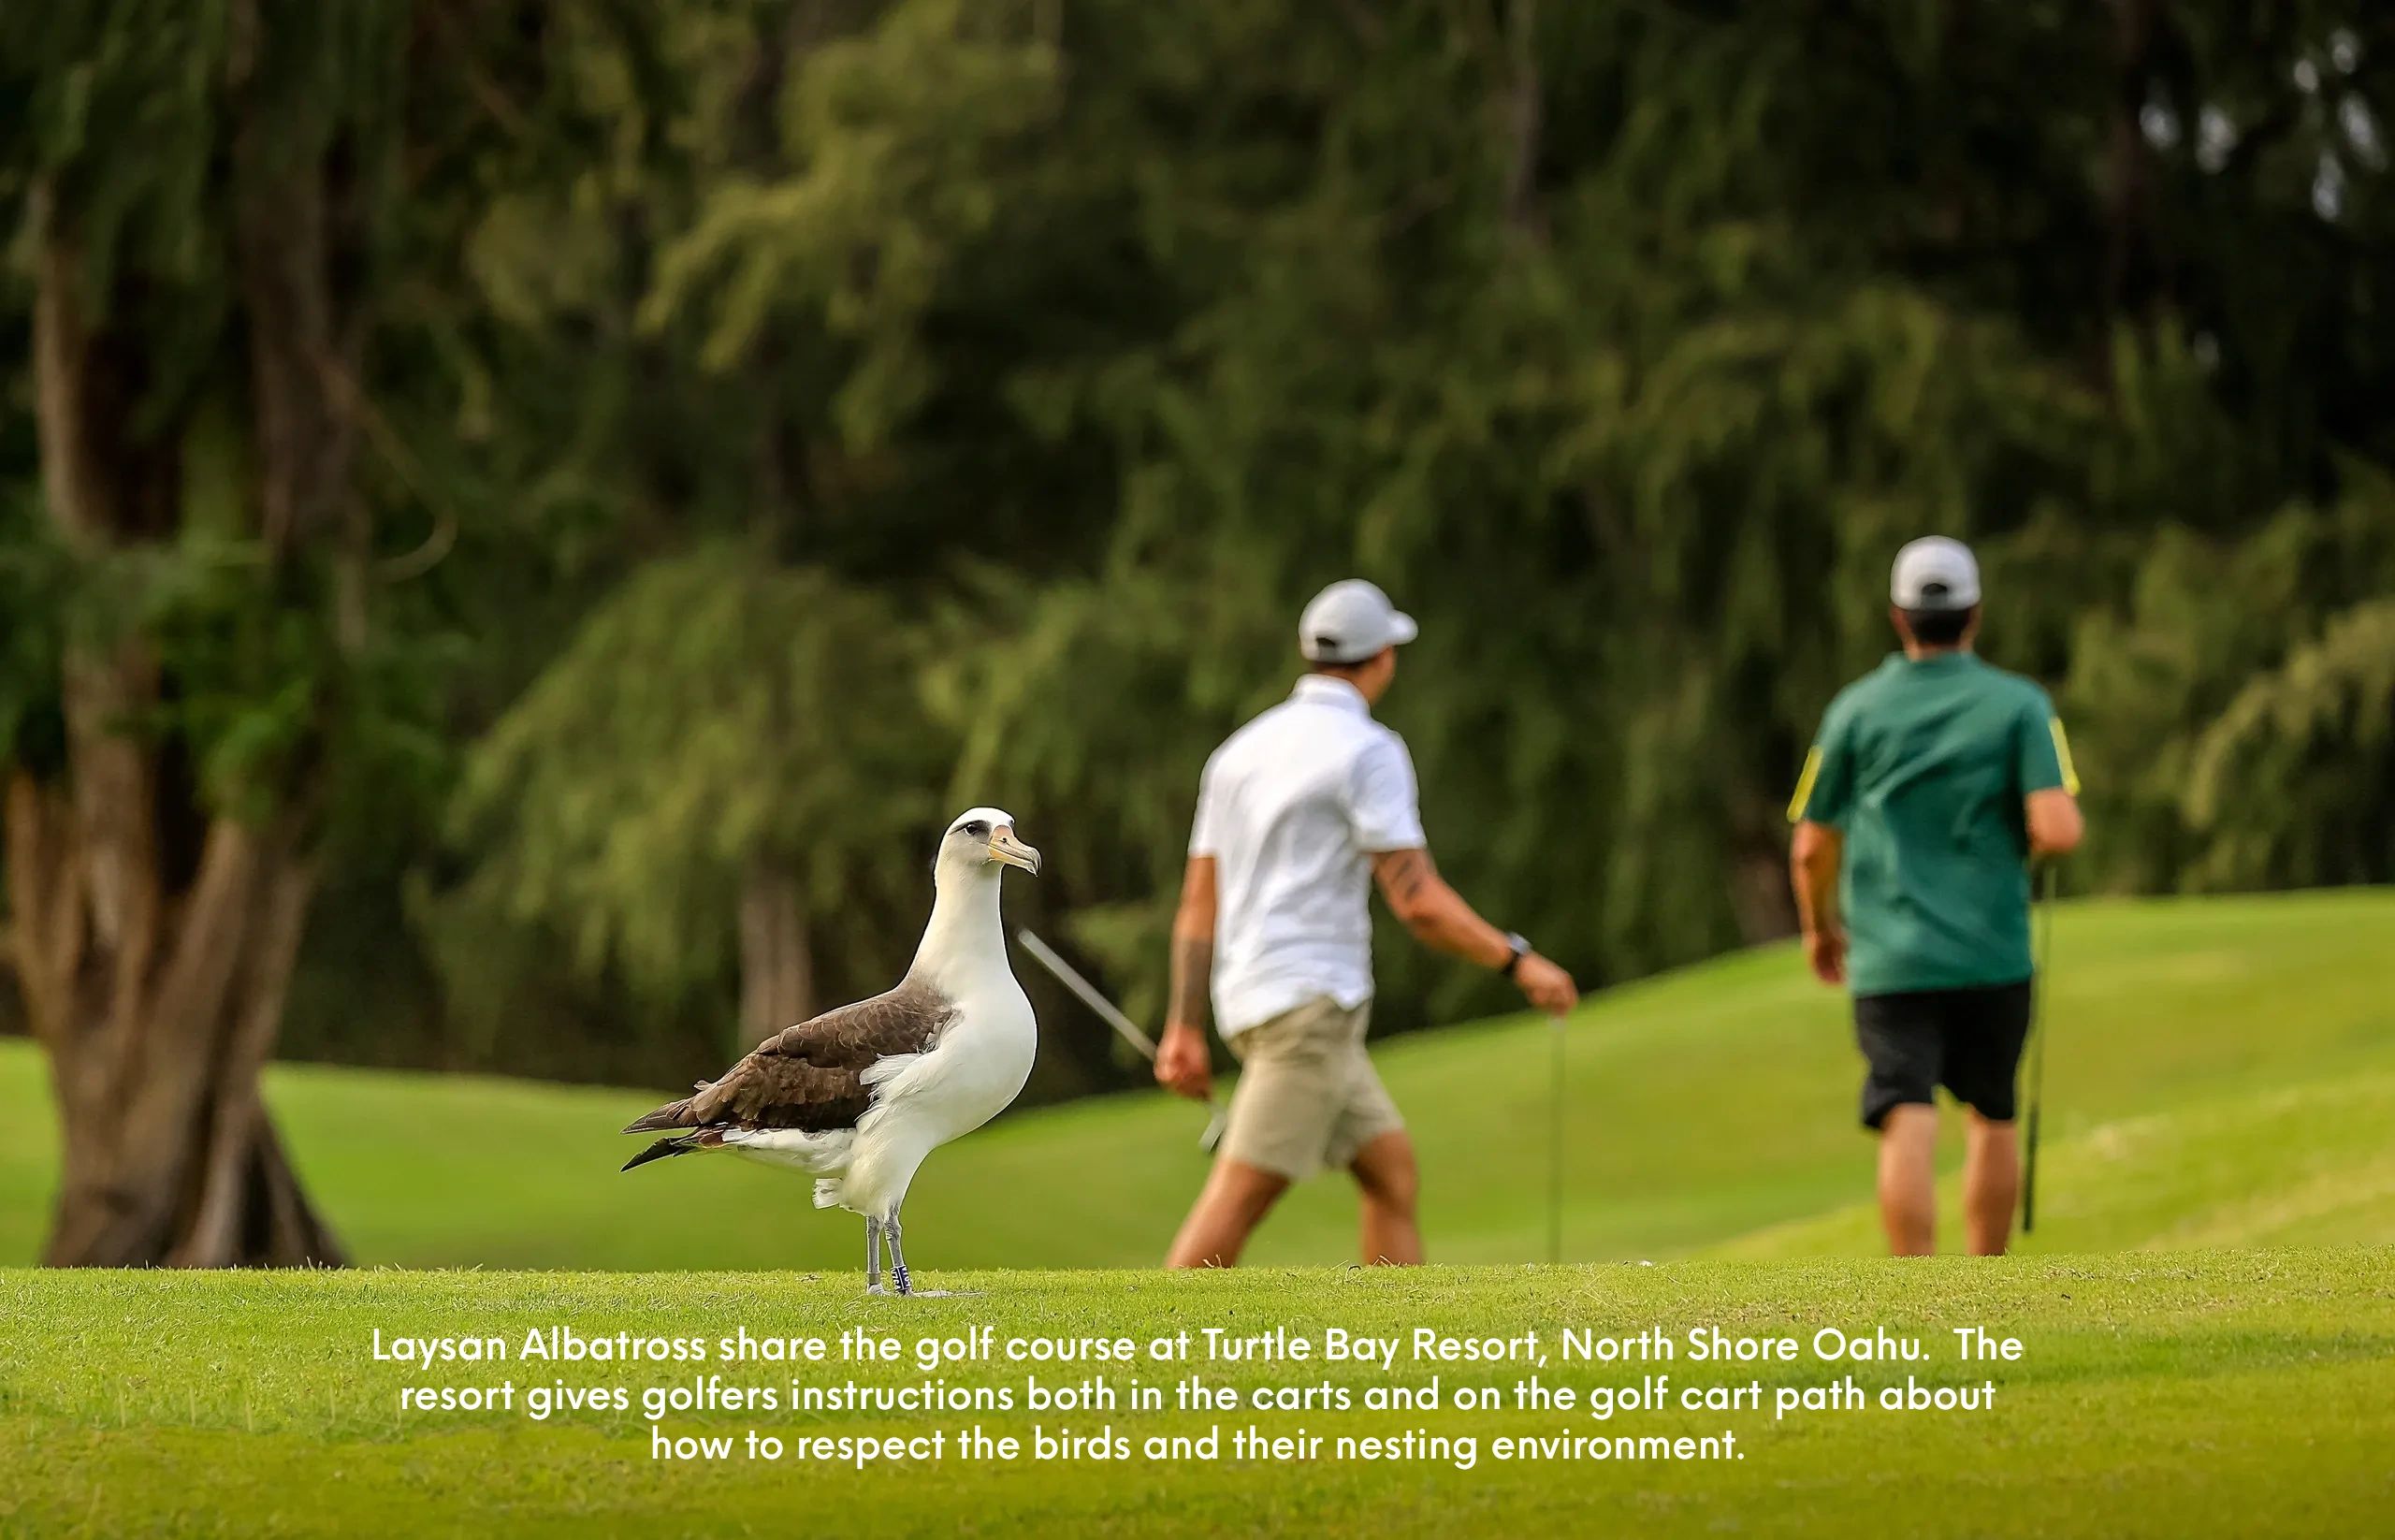 Laysan Albatross and golfers share the course at Turtle Bay Resort, North Shore Oahu